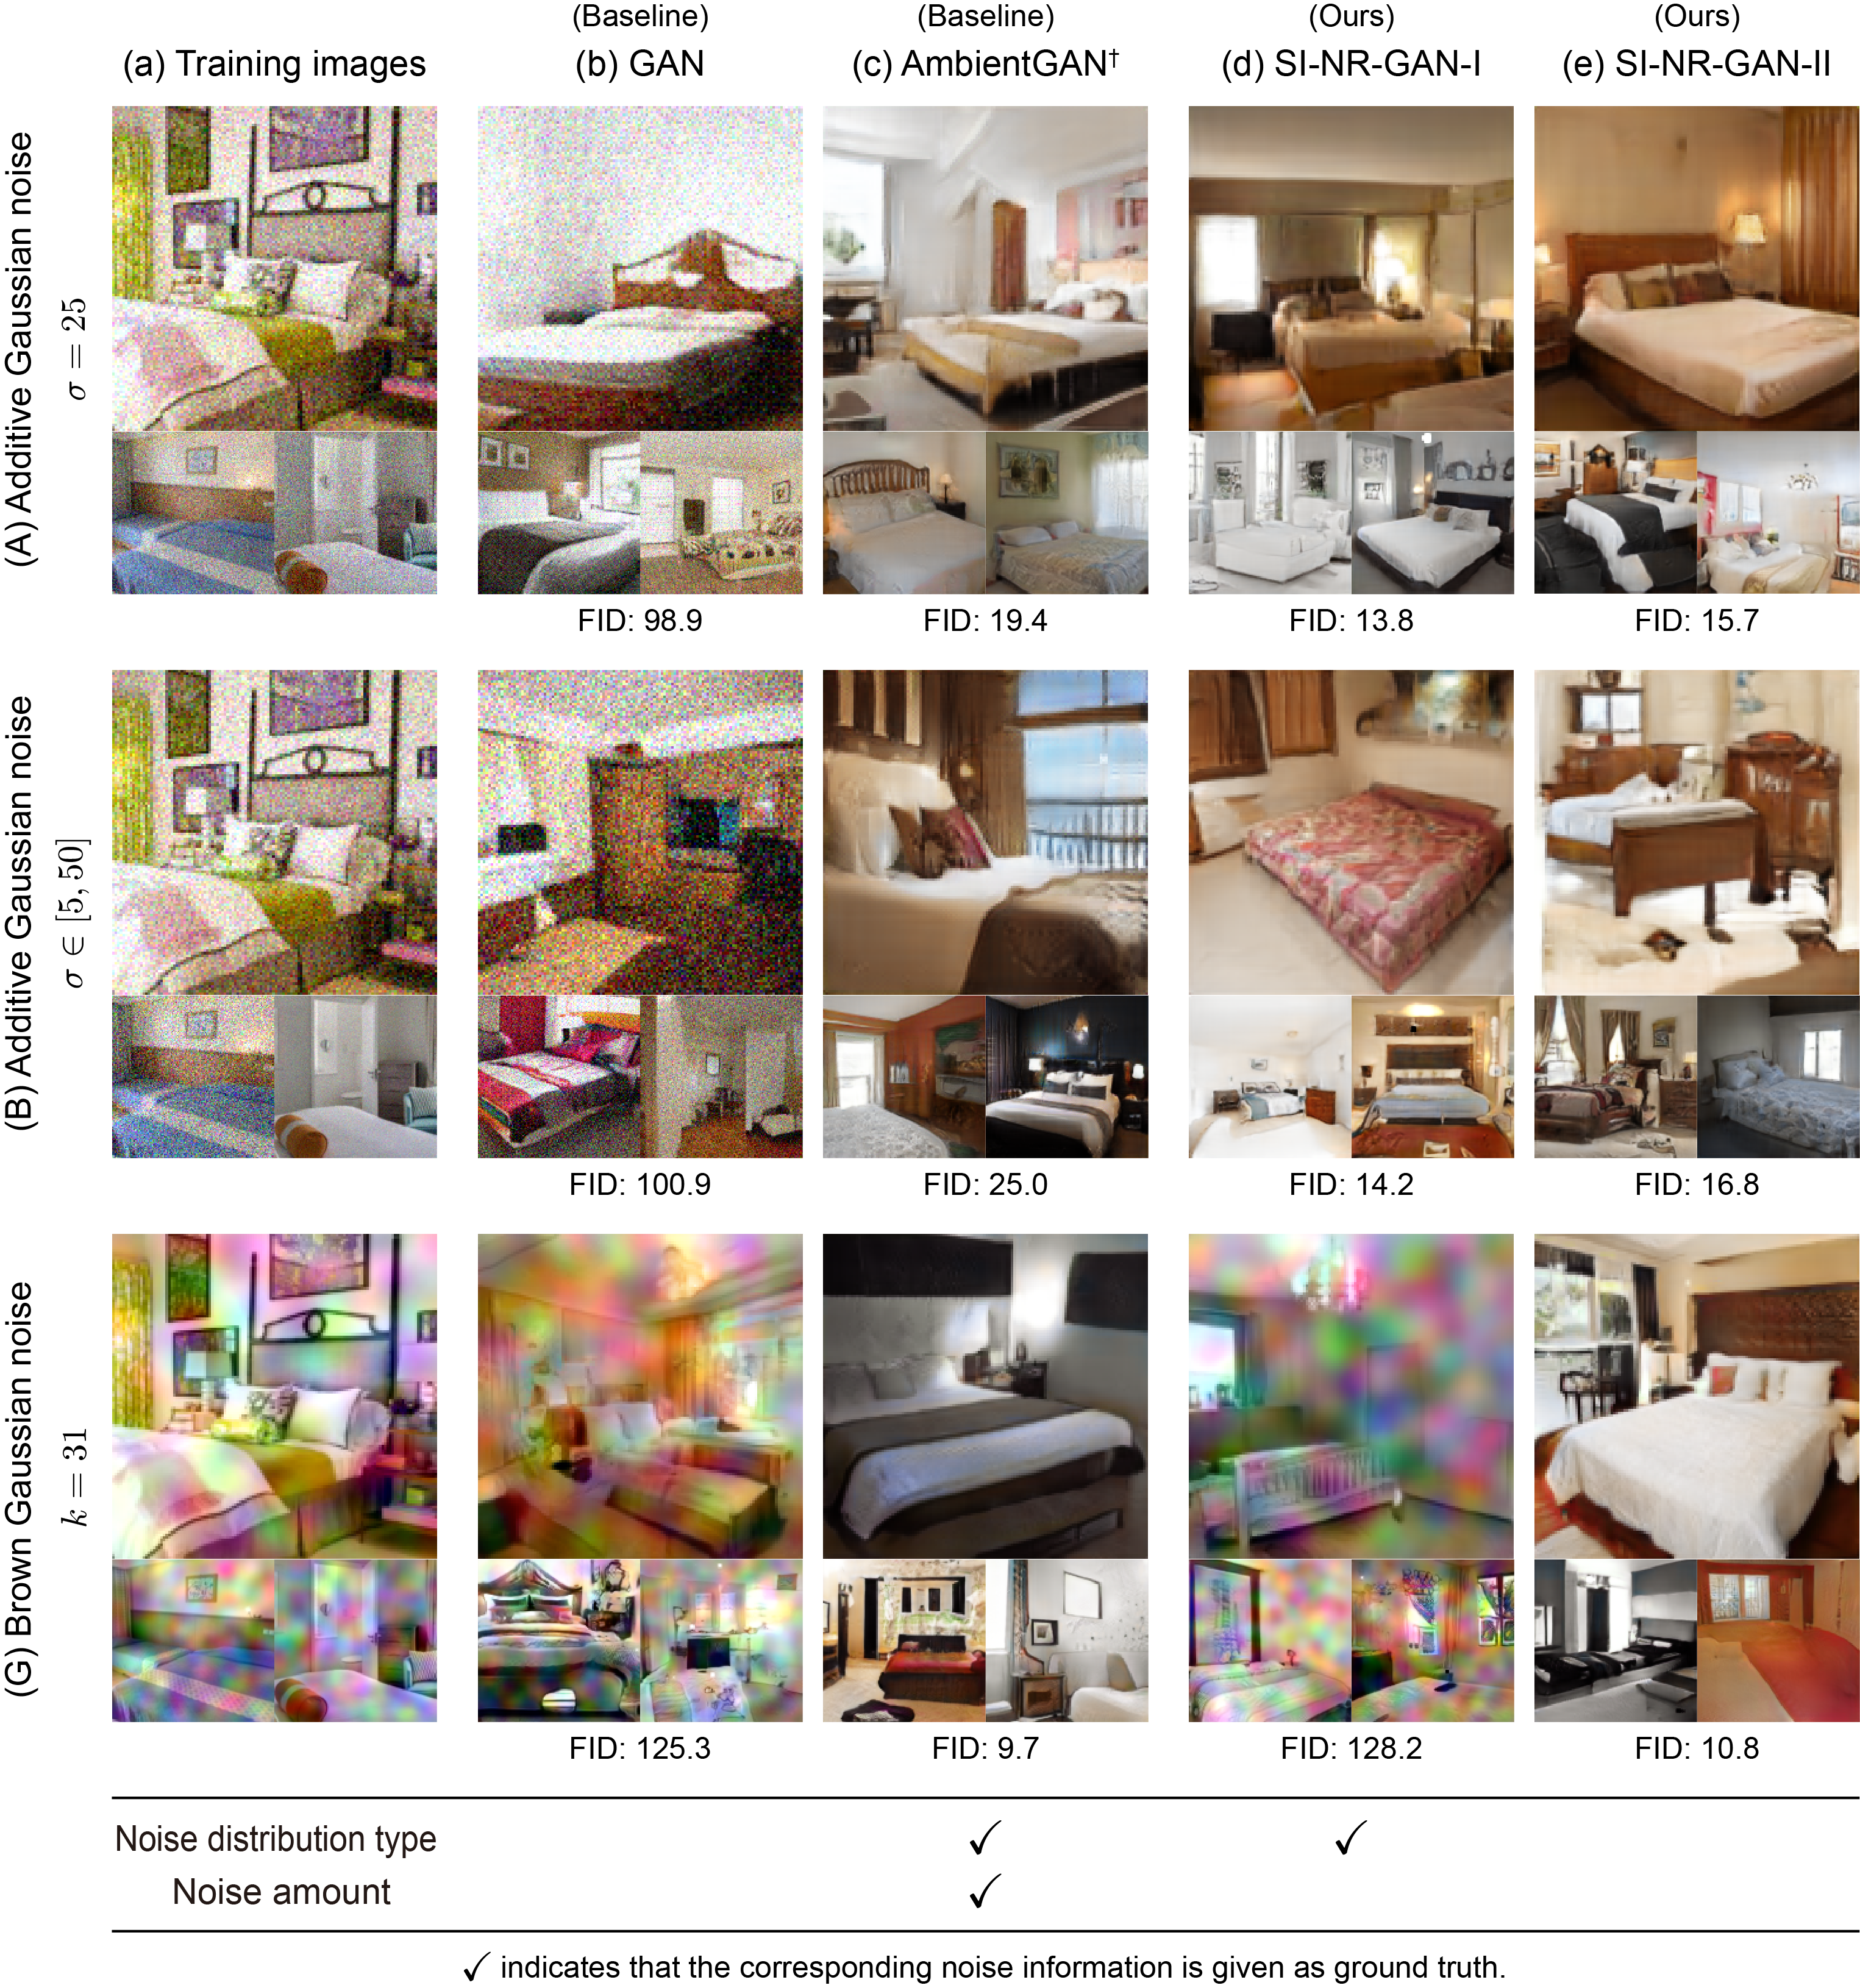 Examples of generated images on LSUN Bedroom with signal-independent noises